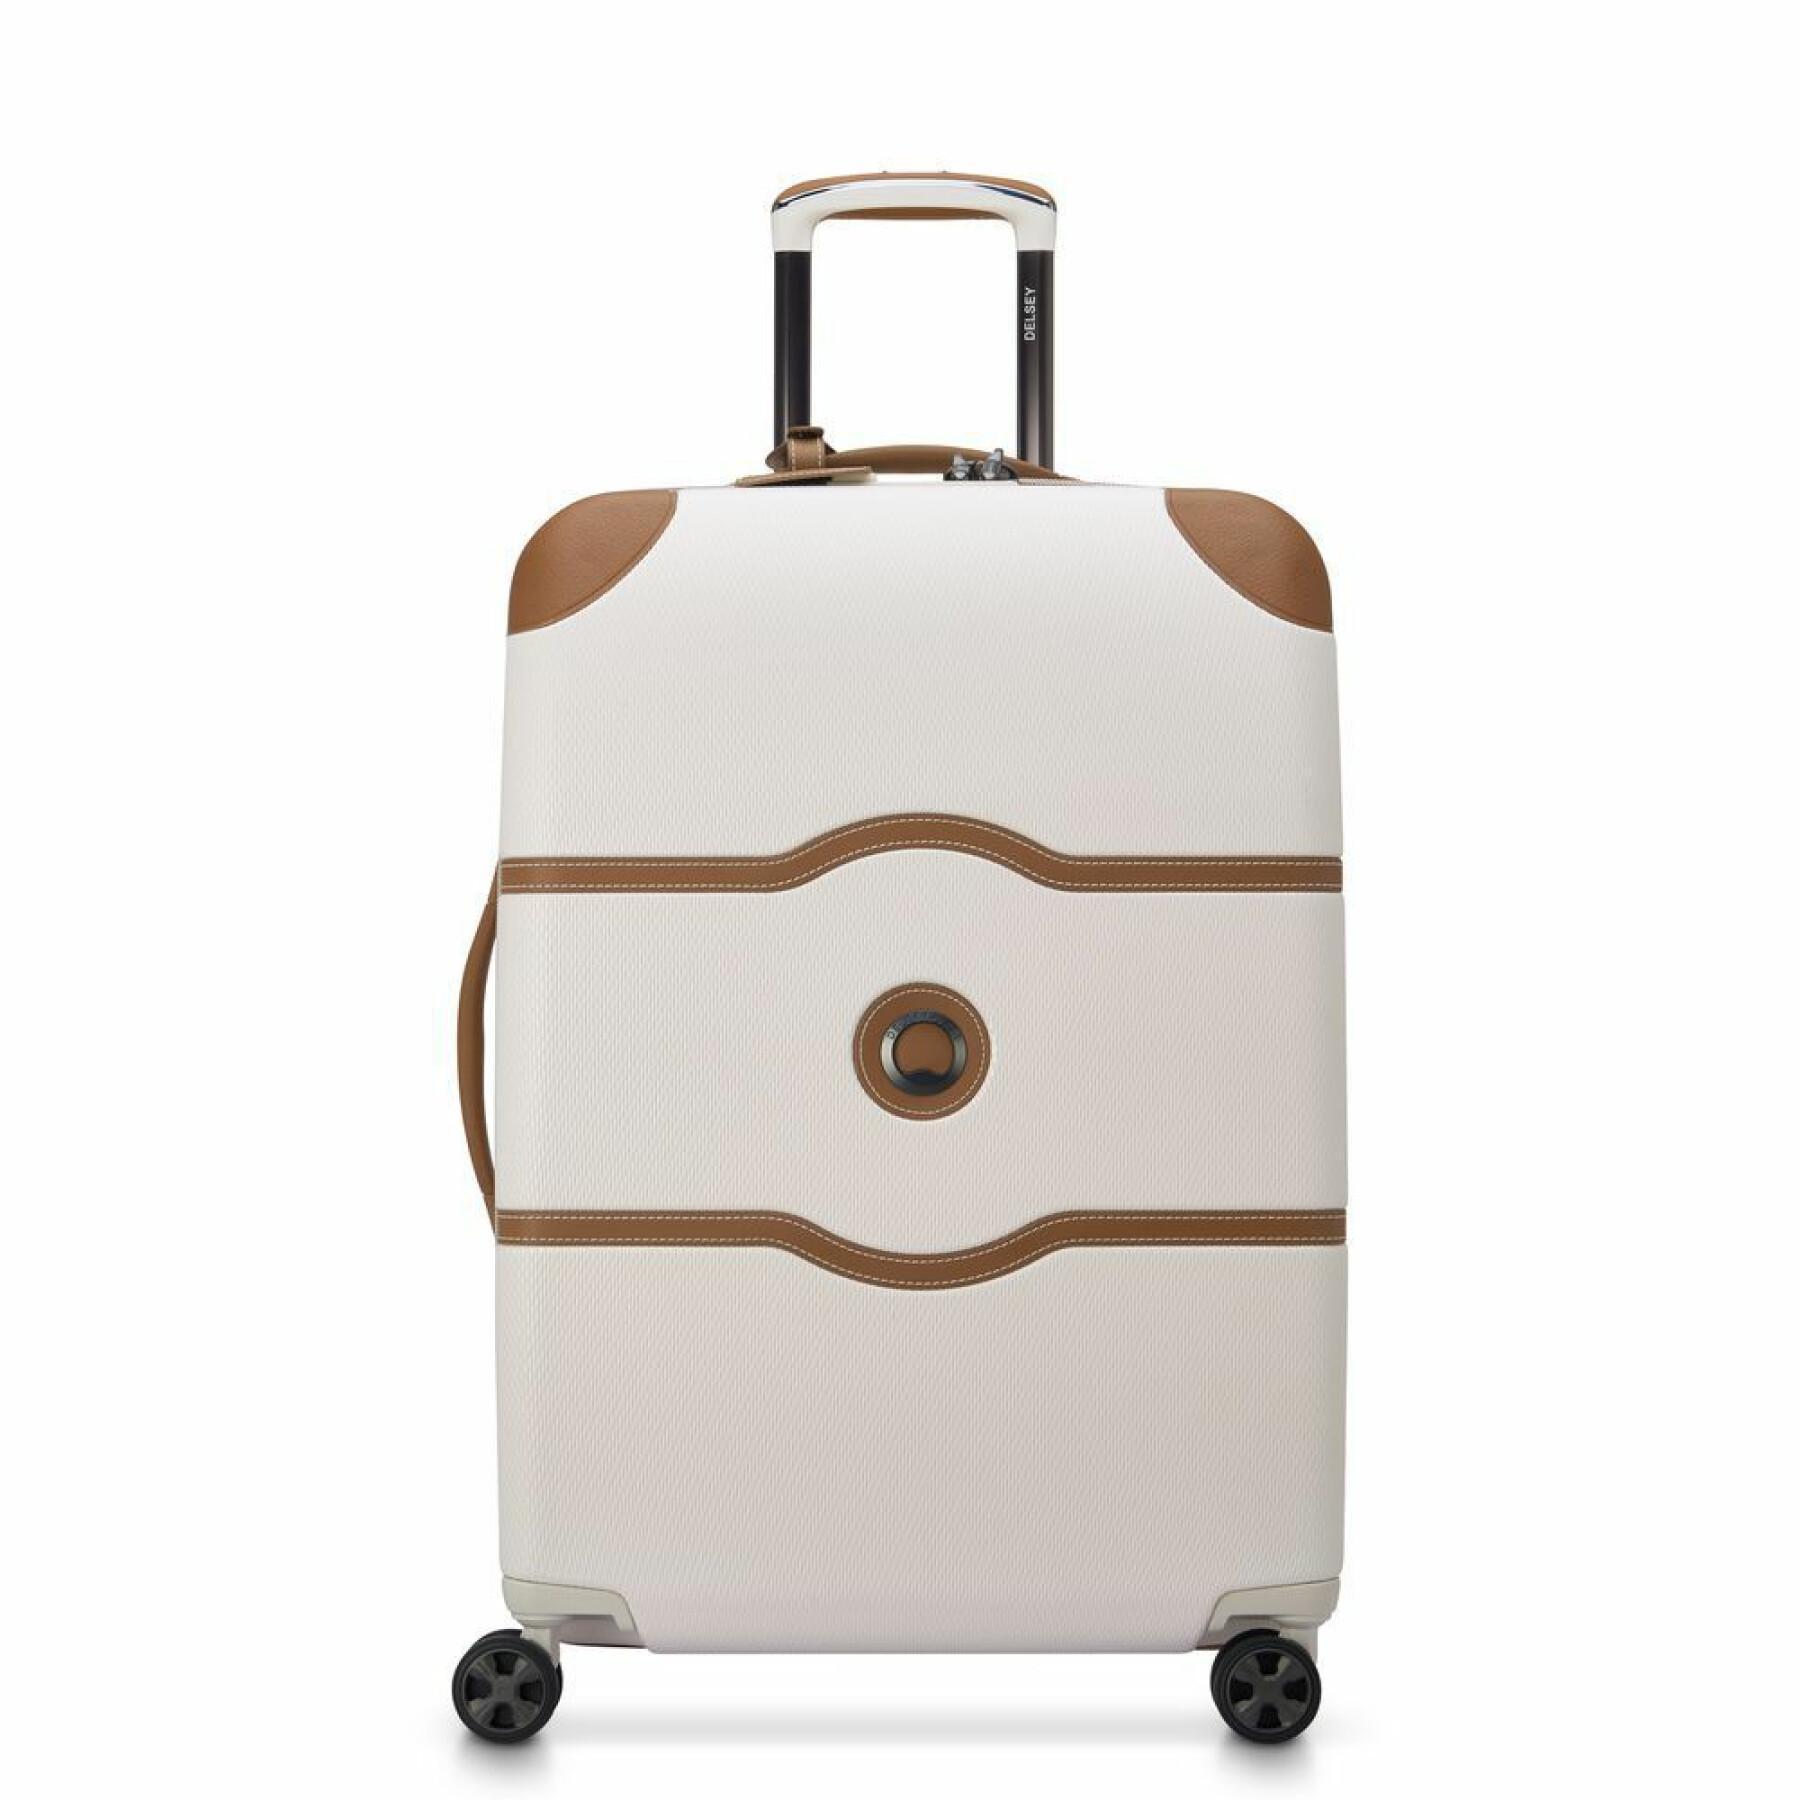 Trolley suitcase 4 double wheels Delsey Chatelet Air 2.0 67 cm